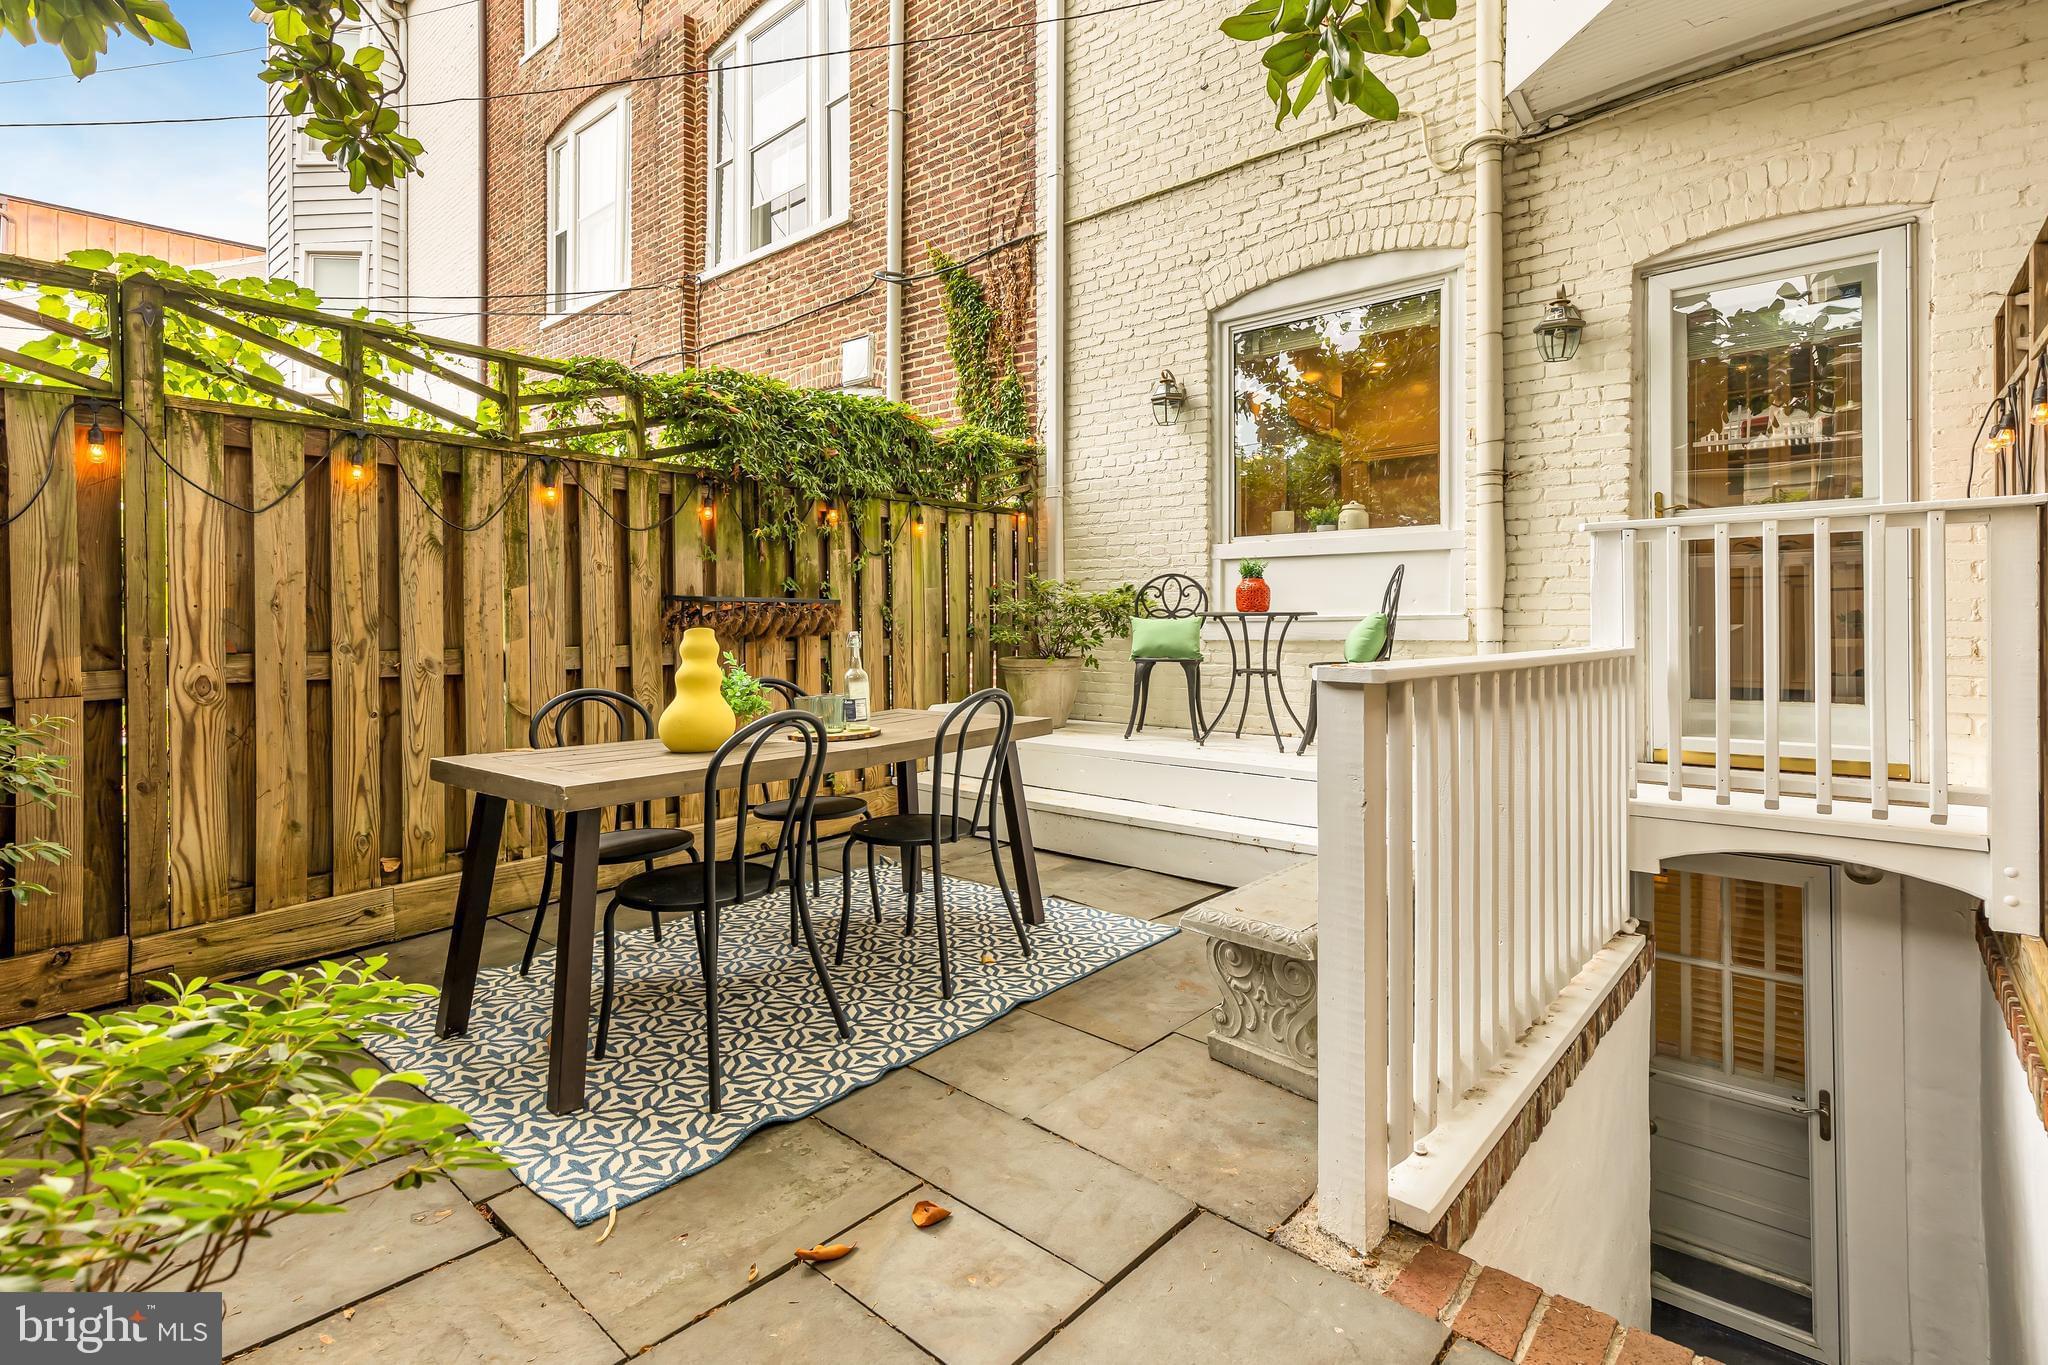 The back patio of a cream-colored brick townhouse with a wooden fence, outdoor furniture, and two access doors